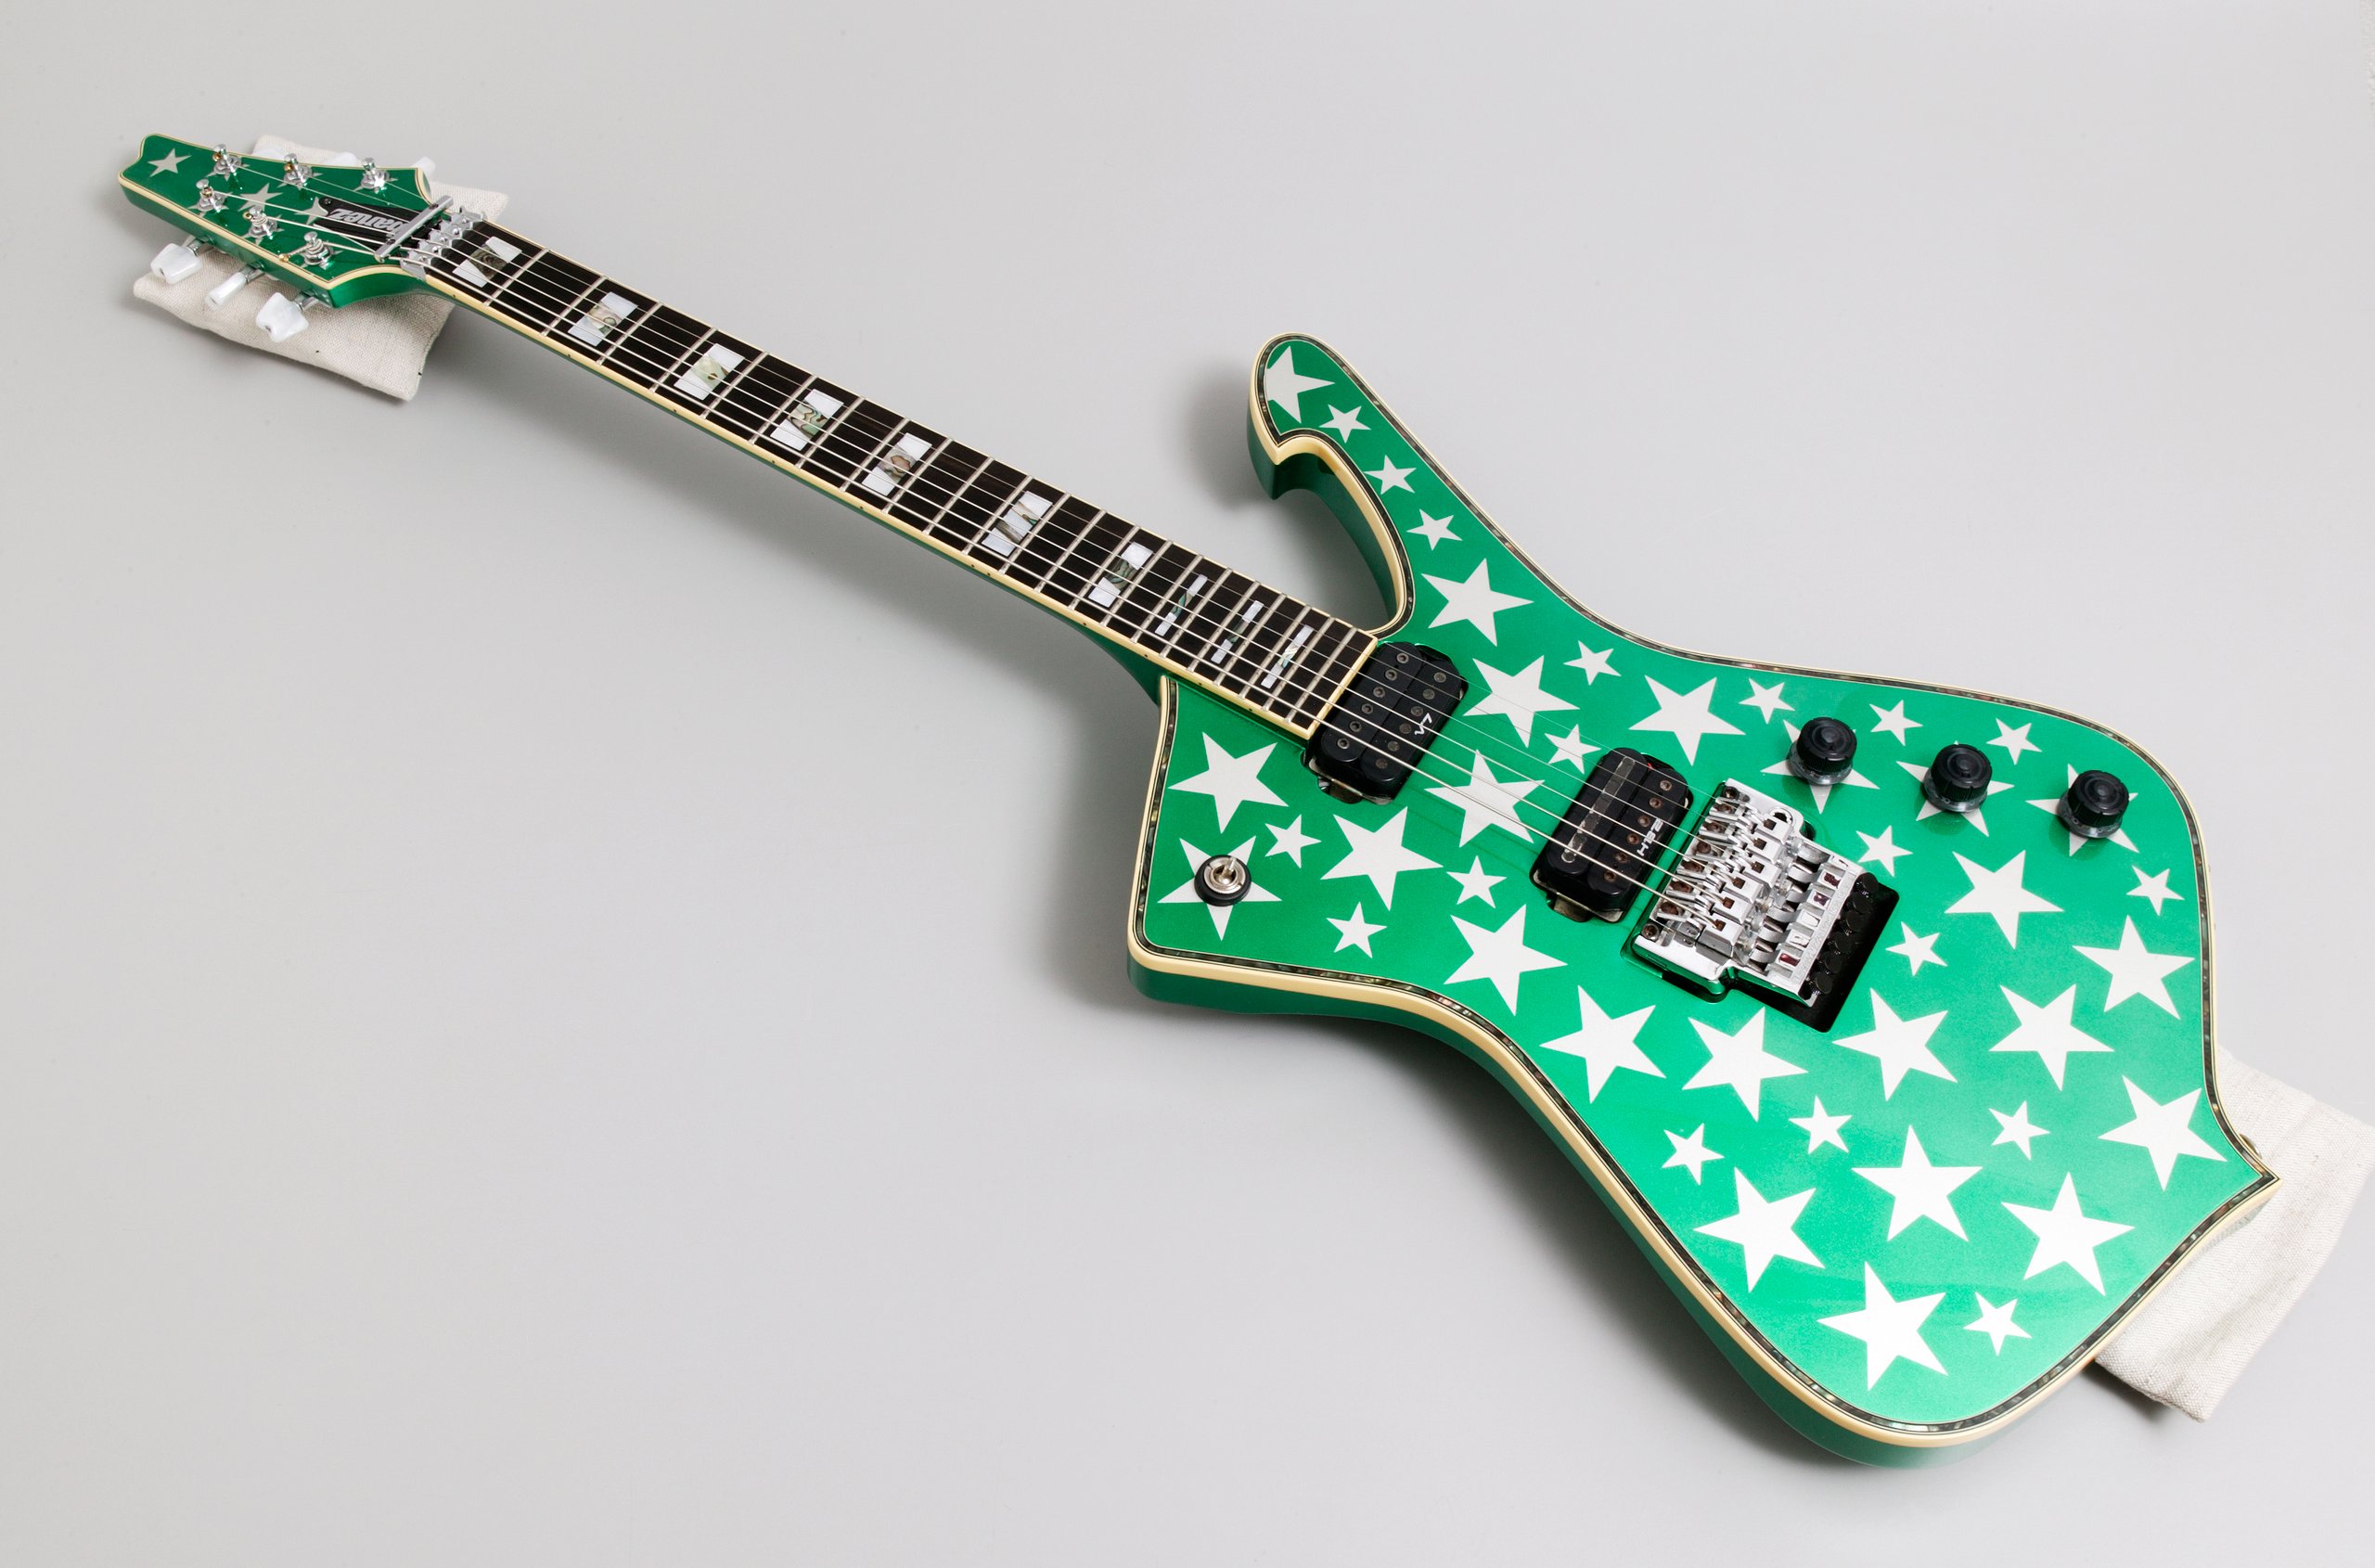 'Iceman' electric guitar used by NoKTuRNL